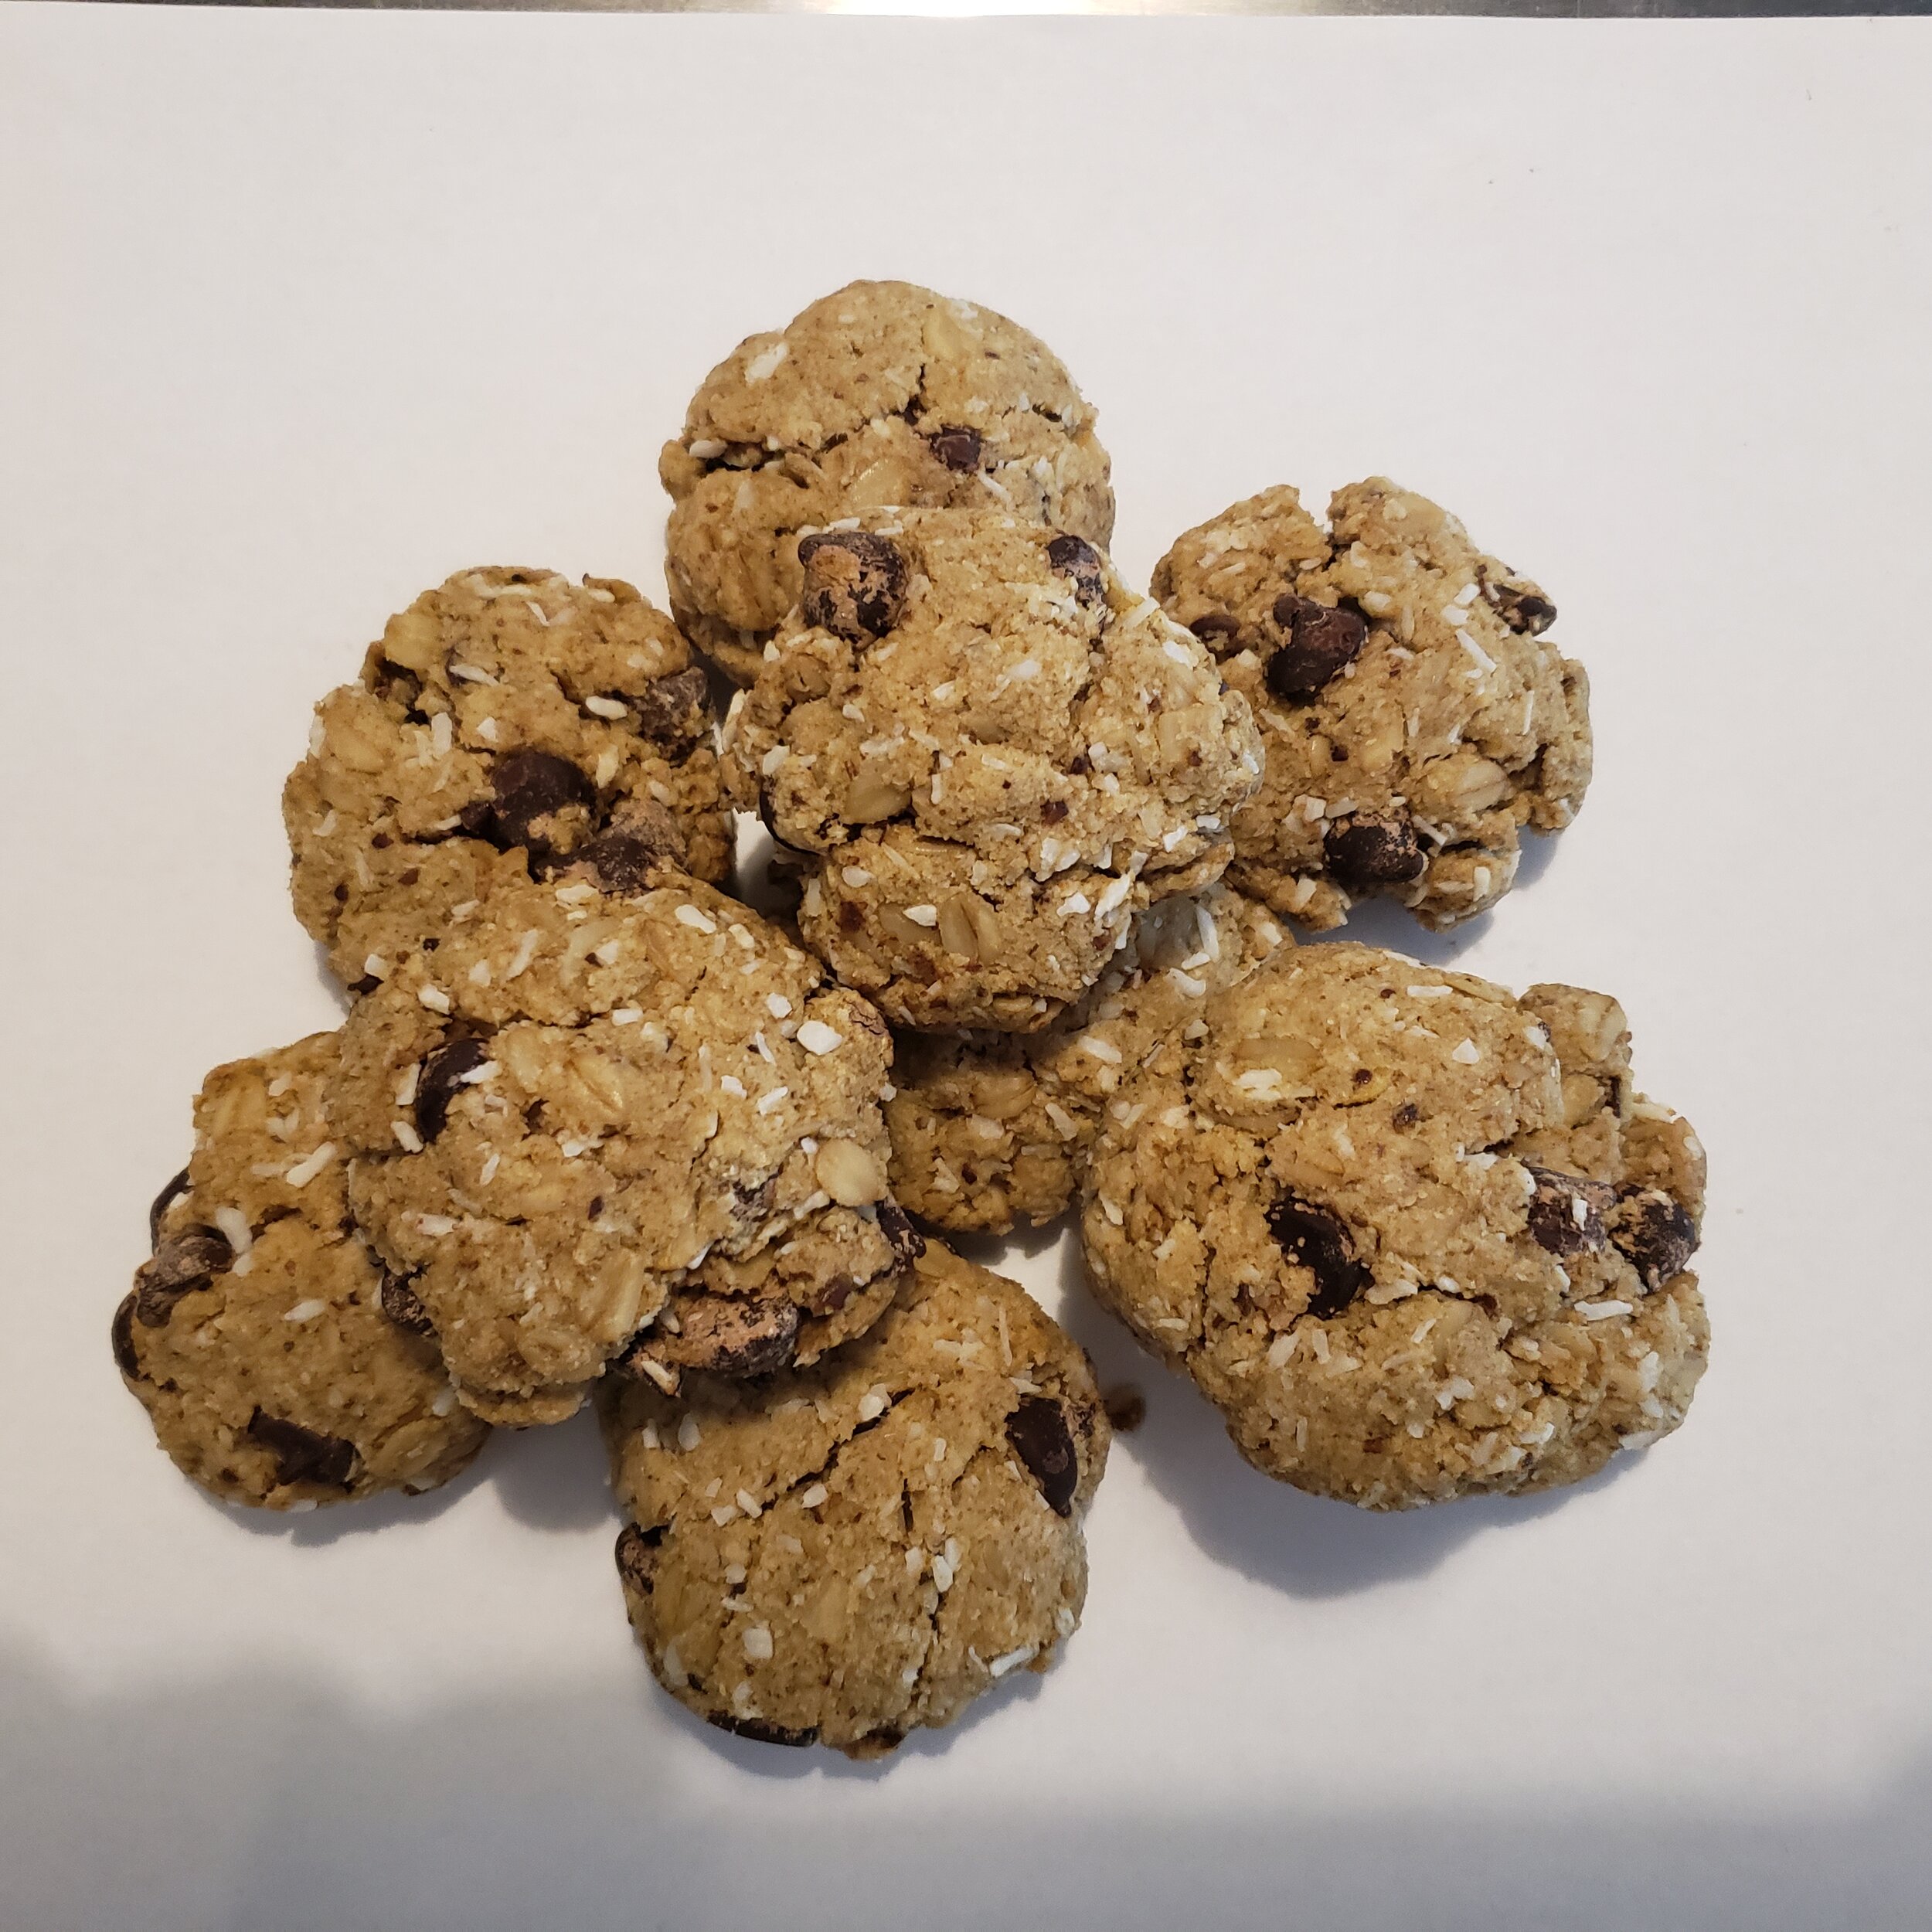   Ready to eat GF DF oatmeal chocolate chip clusters  